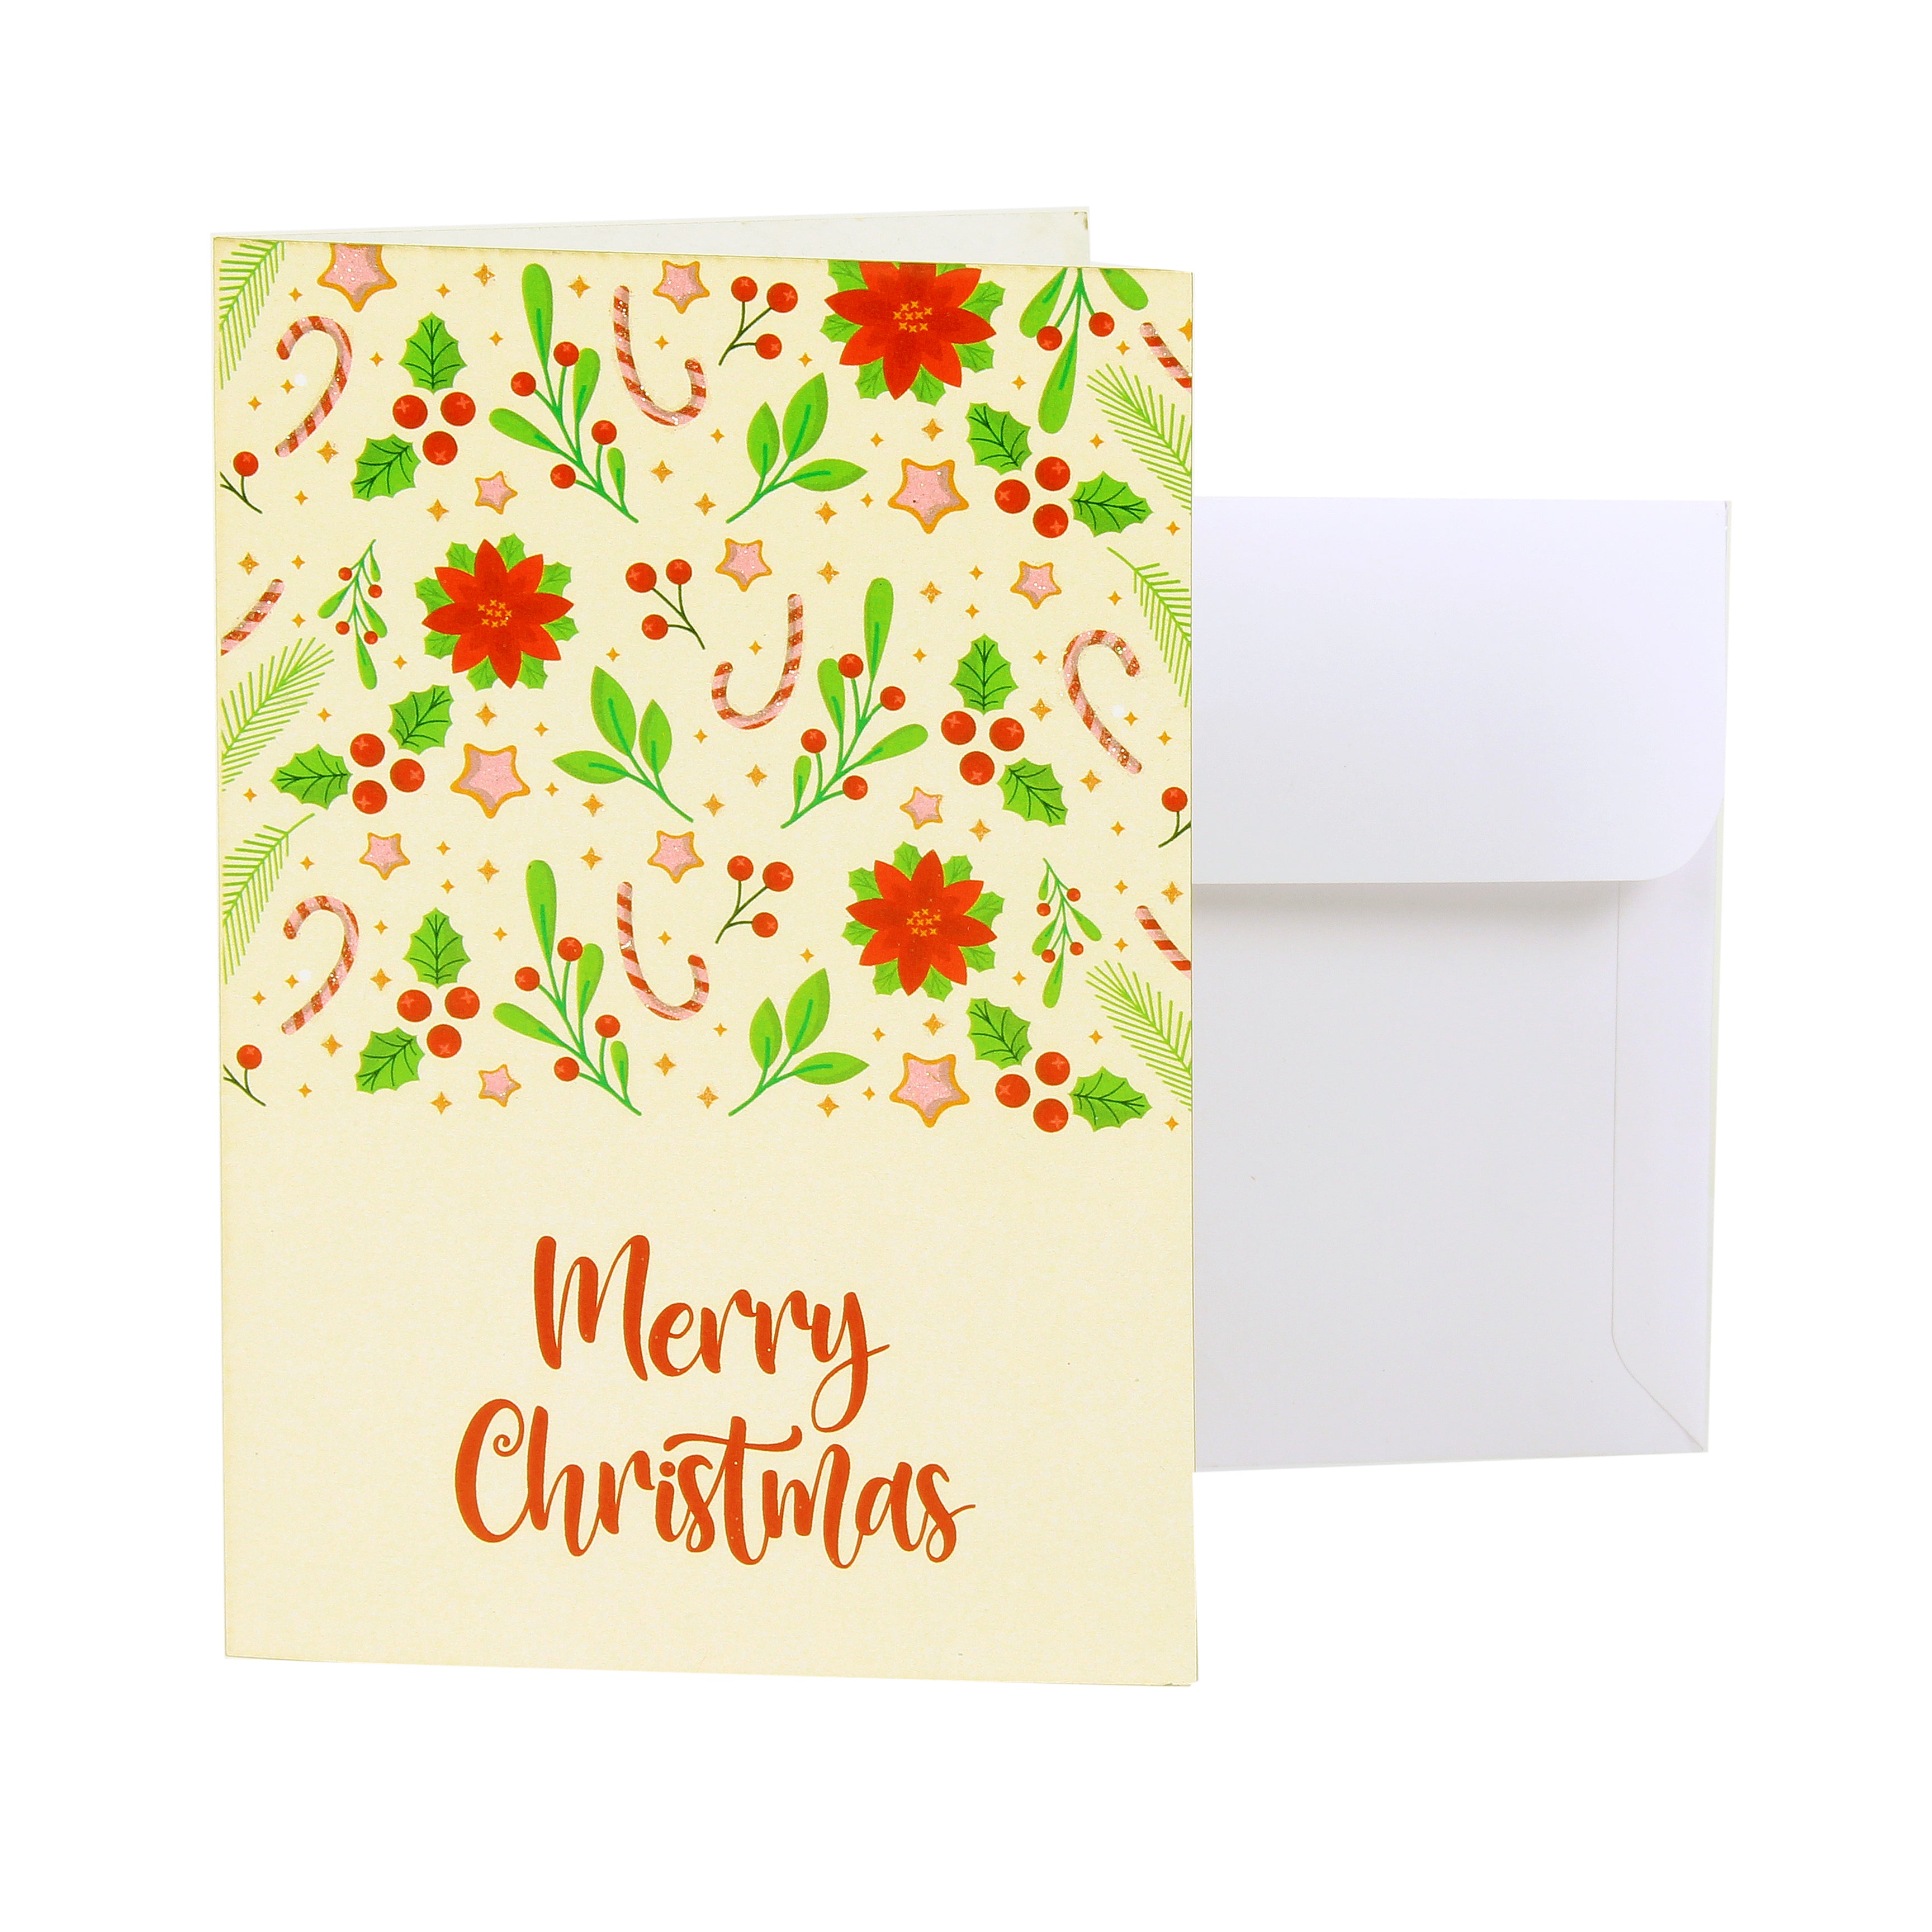 Christmas Greeting Card & Envelope Merry Christmas 4 X 6inch 2pc